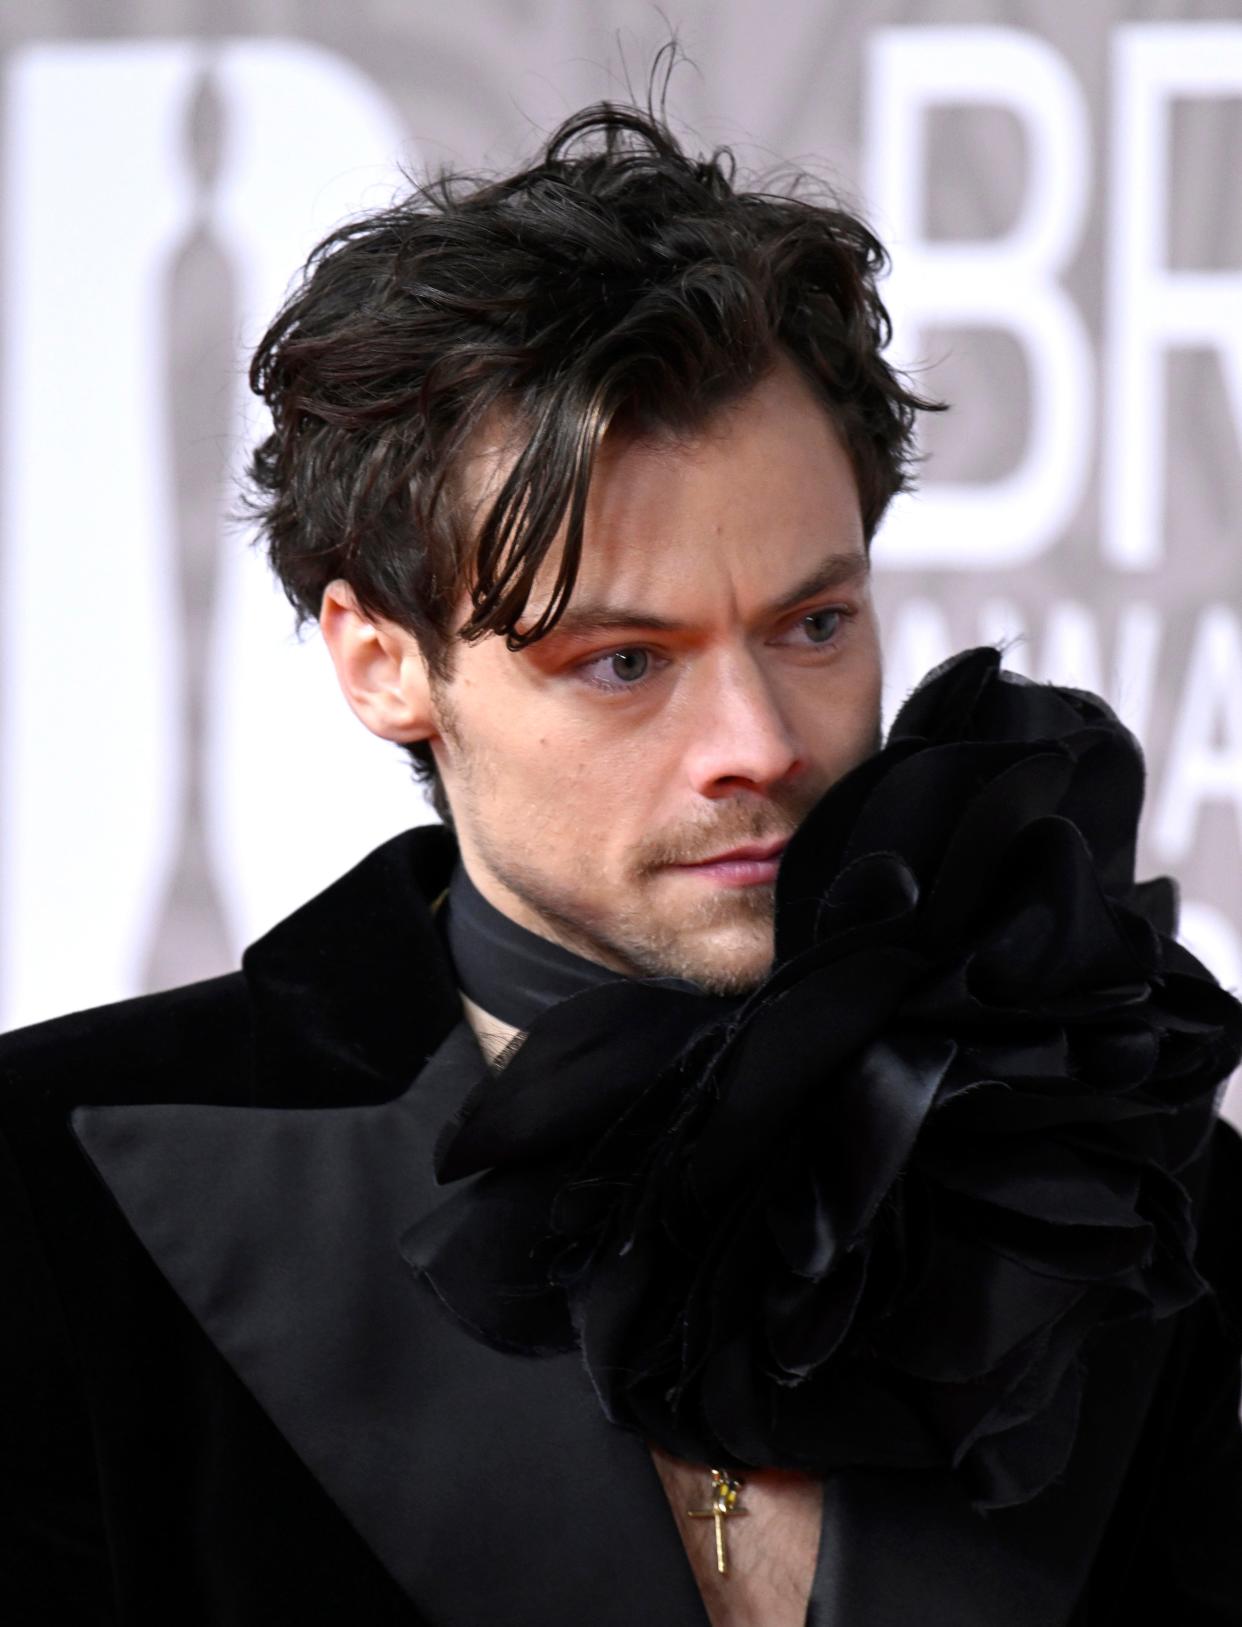 Harry Styles has said goodbye to his iconic brunette locks with a bold buzzcut look, and the shaved hairstyle is dividing fans on social media.